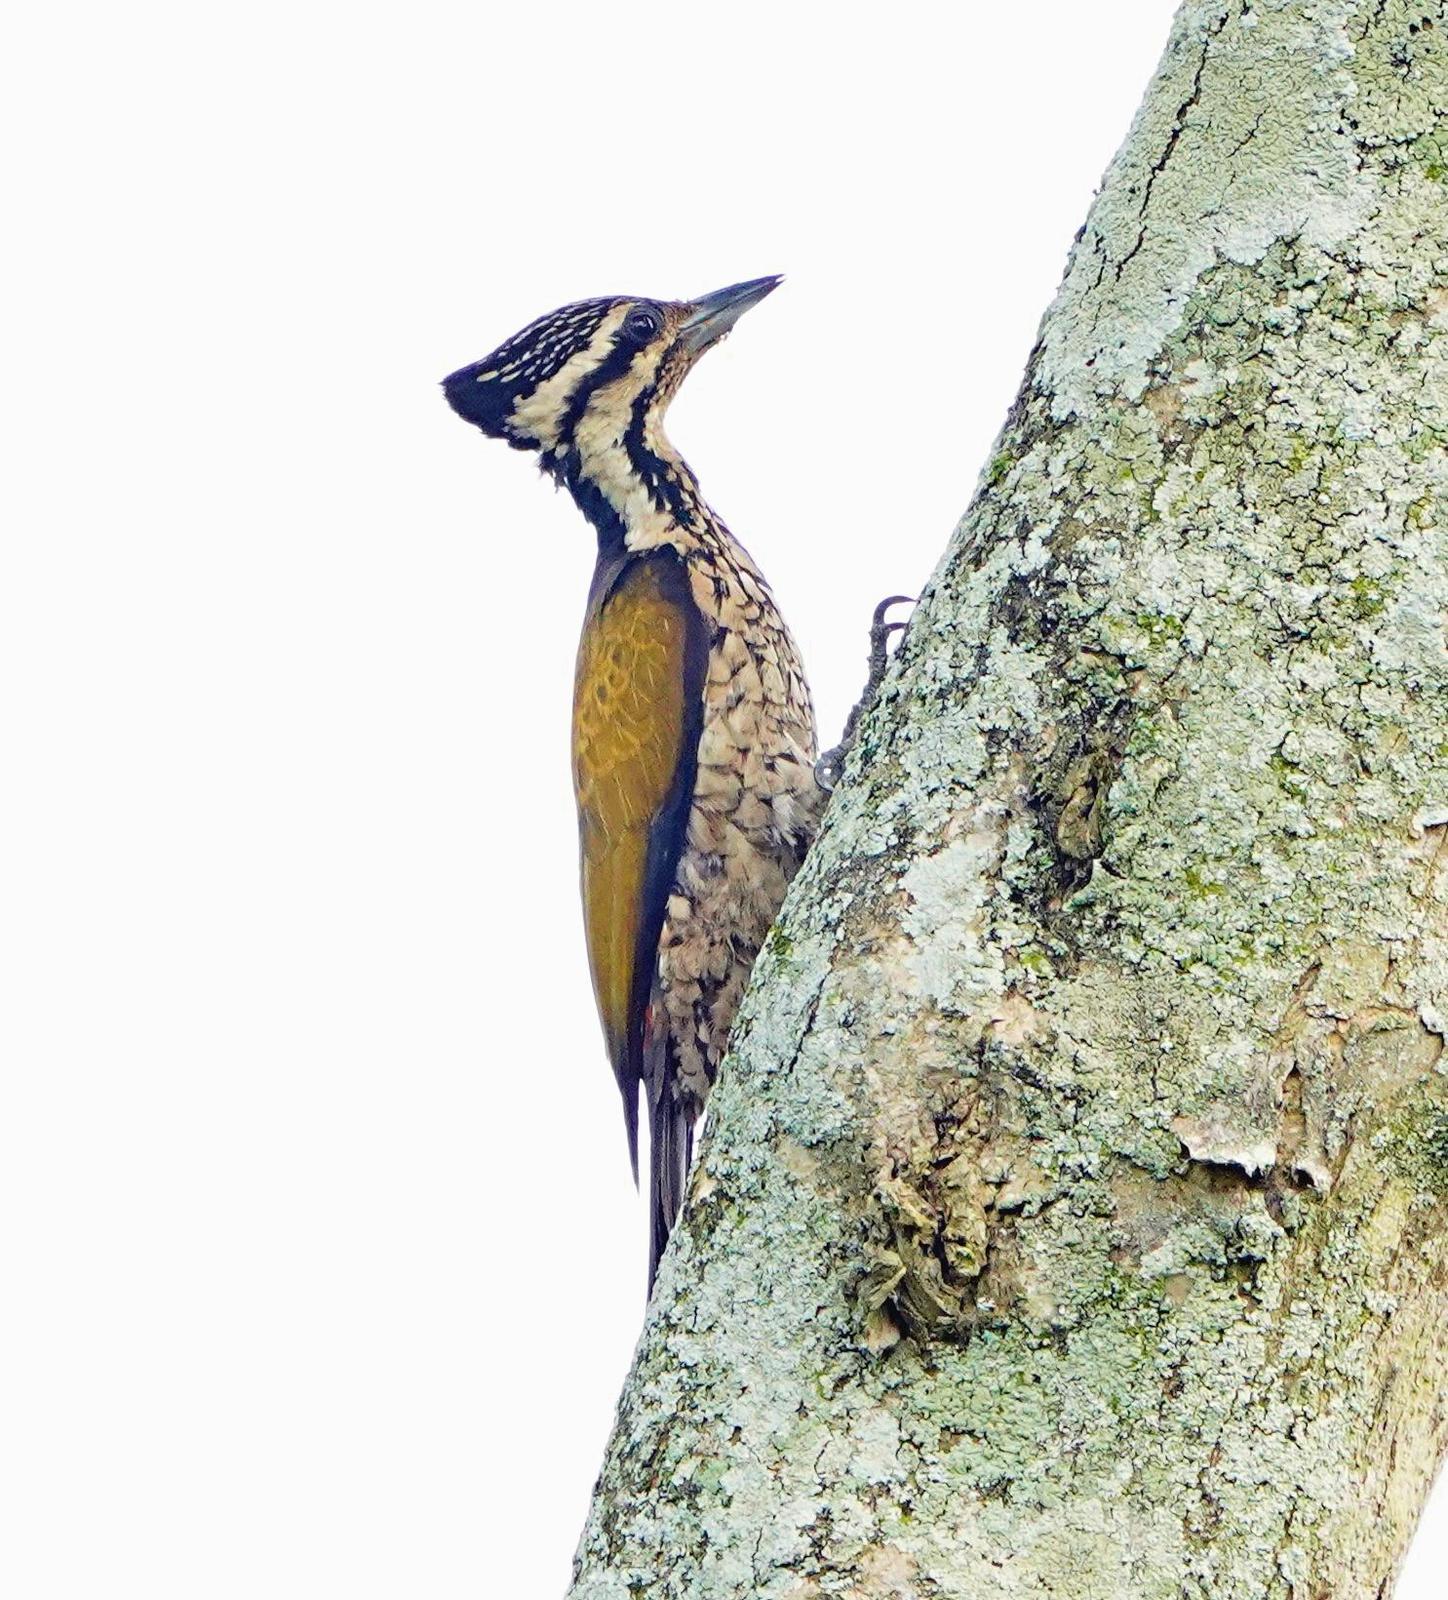 Common Flameback Photo by Steven Cheong